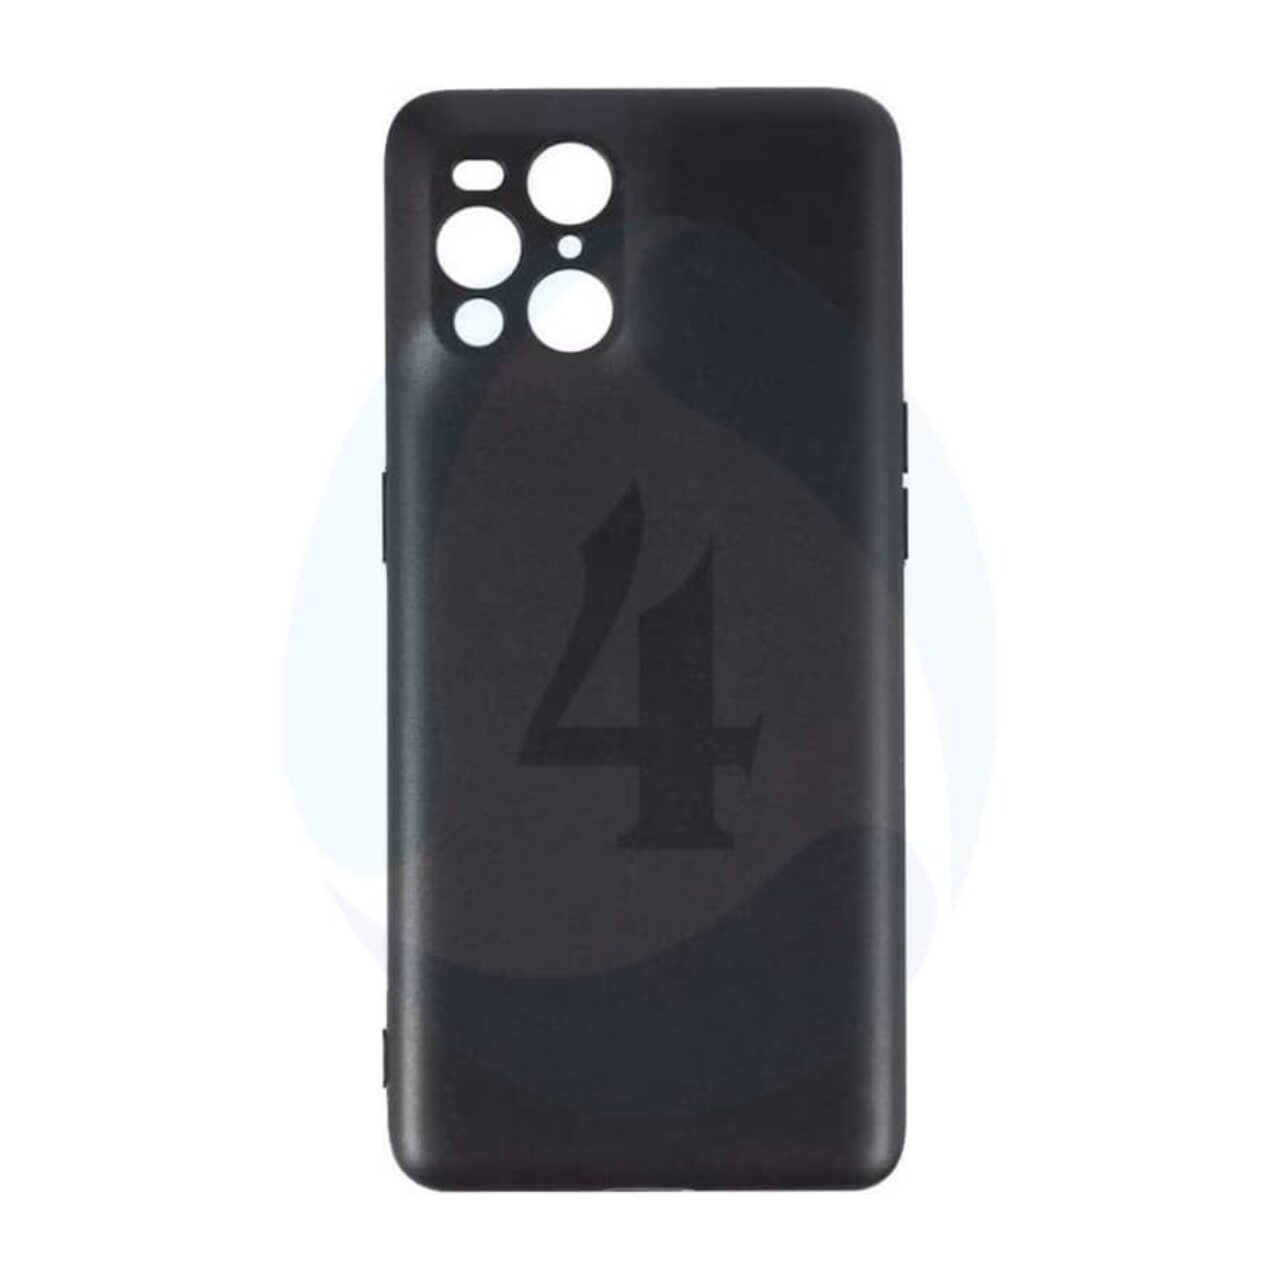 Backcover Black For Oppo Find X3